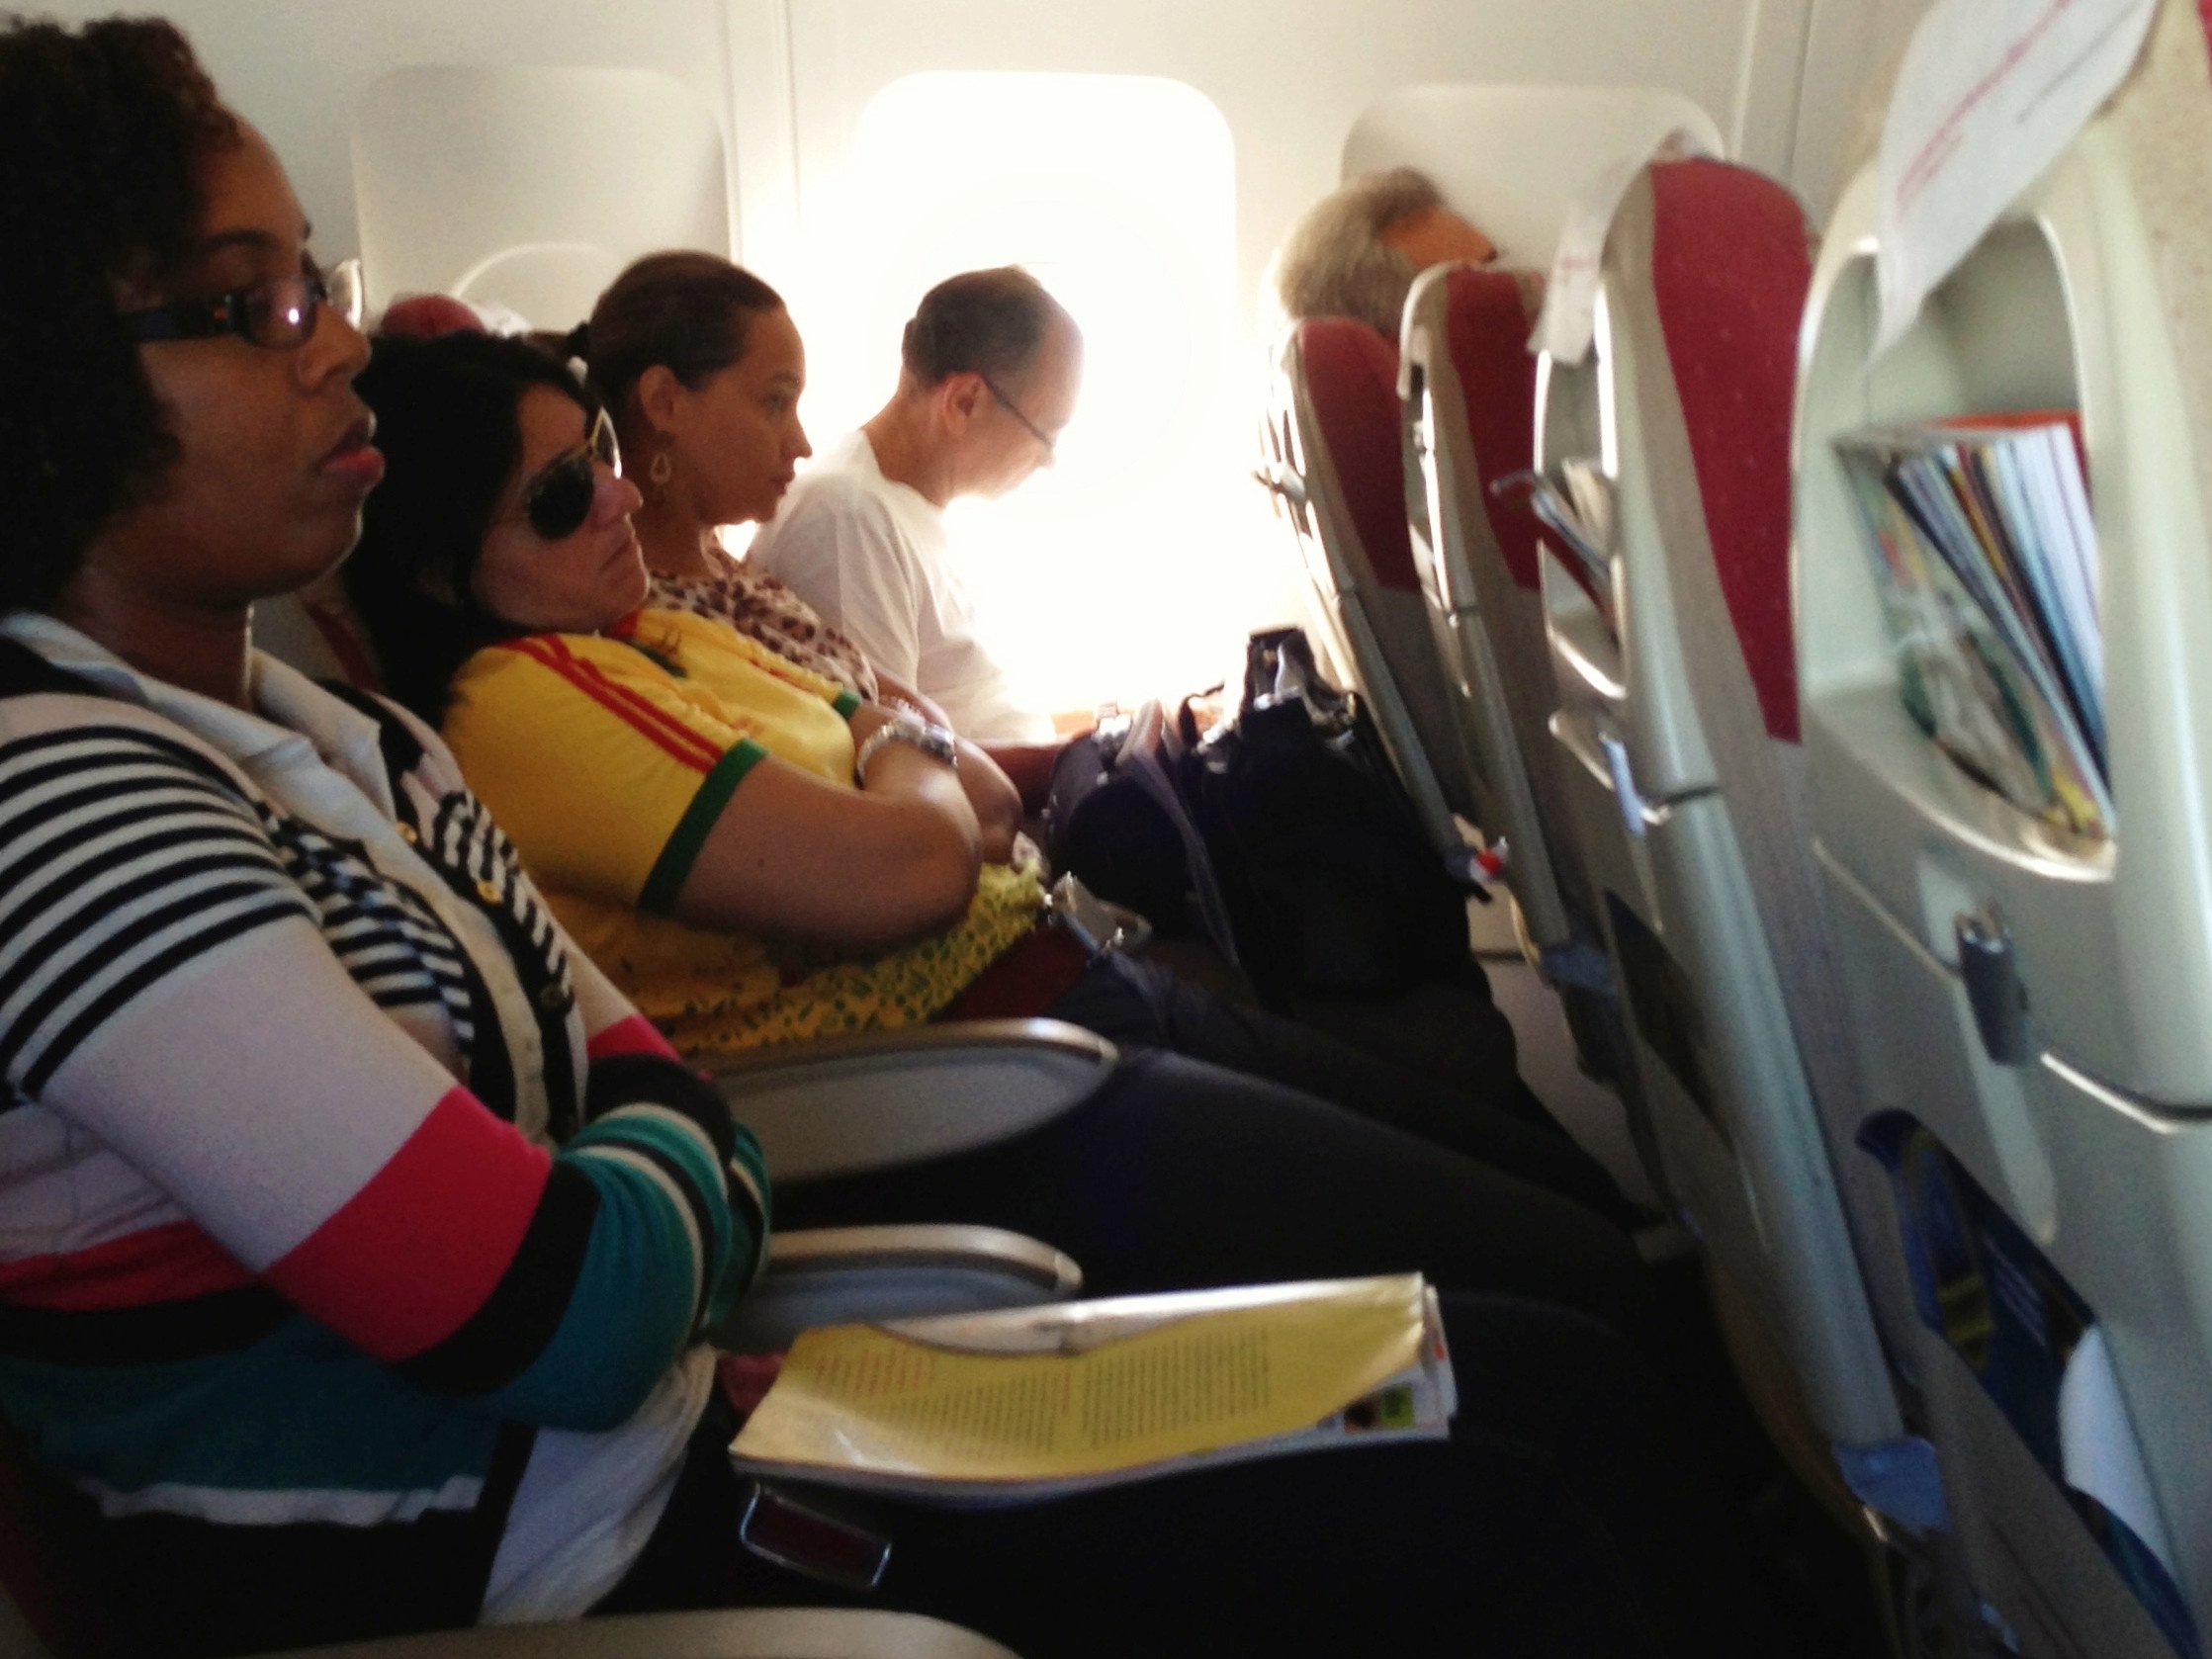 Reclining Seat Air Caraibes. Know when to Recline your Seat on a plane. The plane showed the passengers